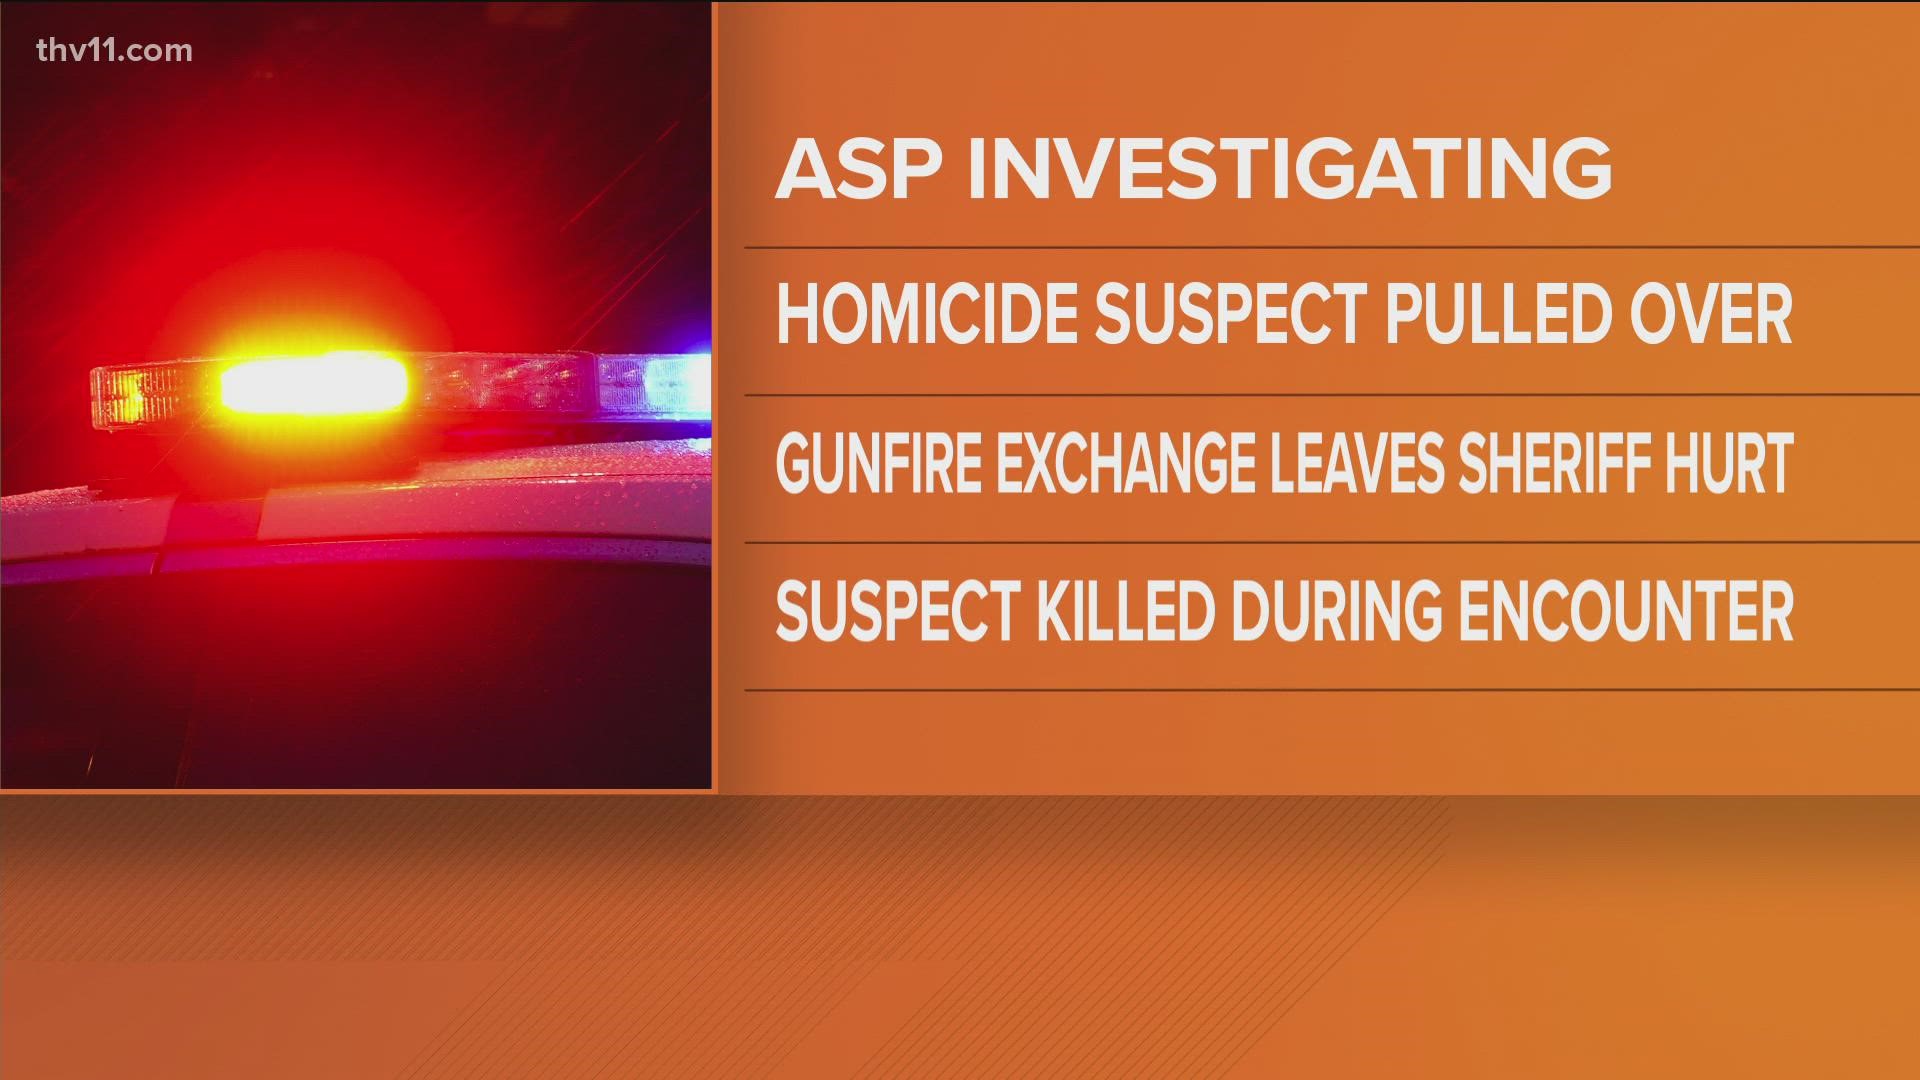 Arkansas State Police are investigating a homicide that led to a shooting between the alleged suspect and law enforcement.